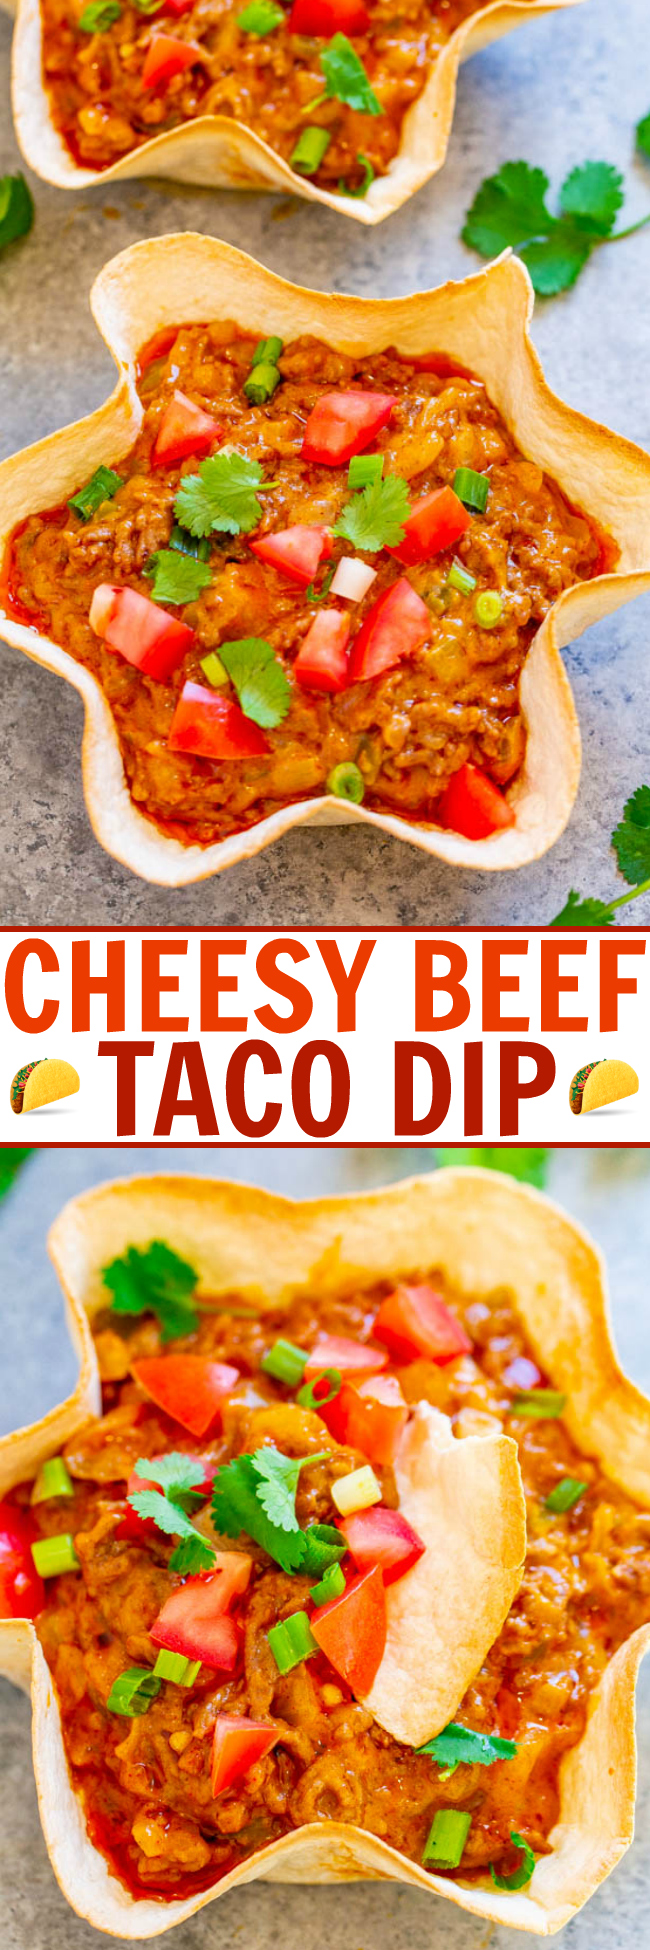 Cheesy Beef Taco Dip - EASY, ready in 15 minutes, and tastes like an awesome beef taco that's extra CHEESY in dip form and so good!! The Bakeable Tortilla Bowls are so fun! PERFECT for game day parties and get-togethers!!